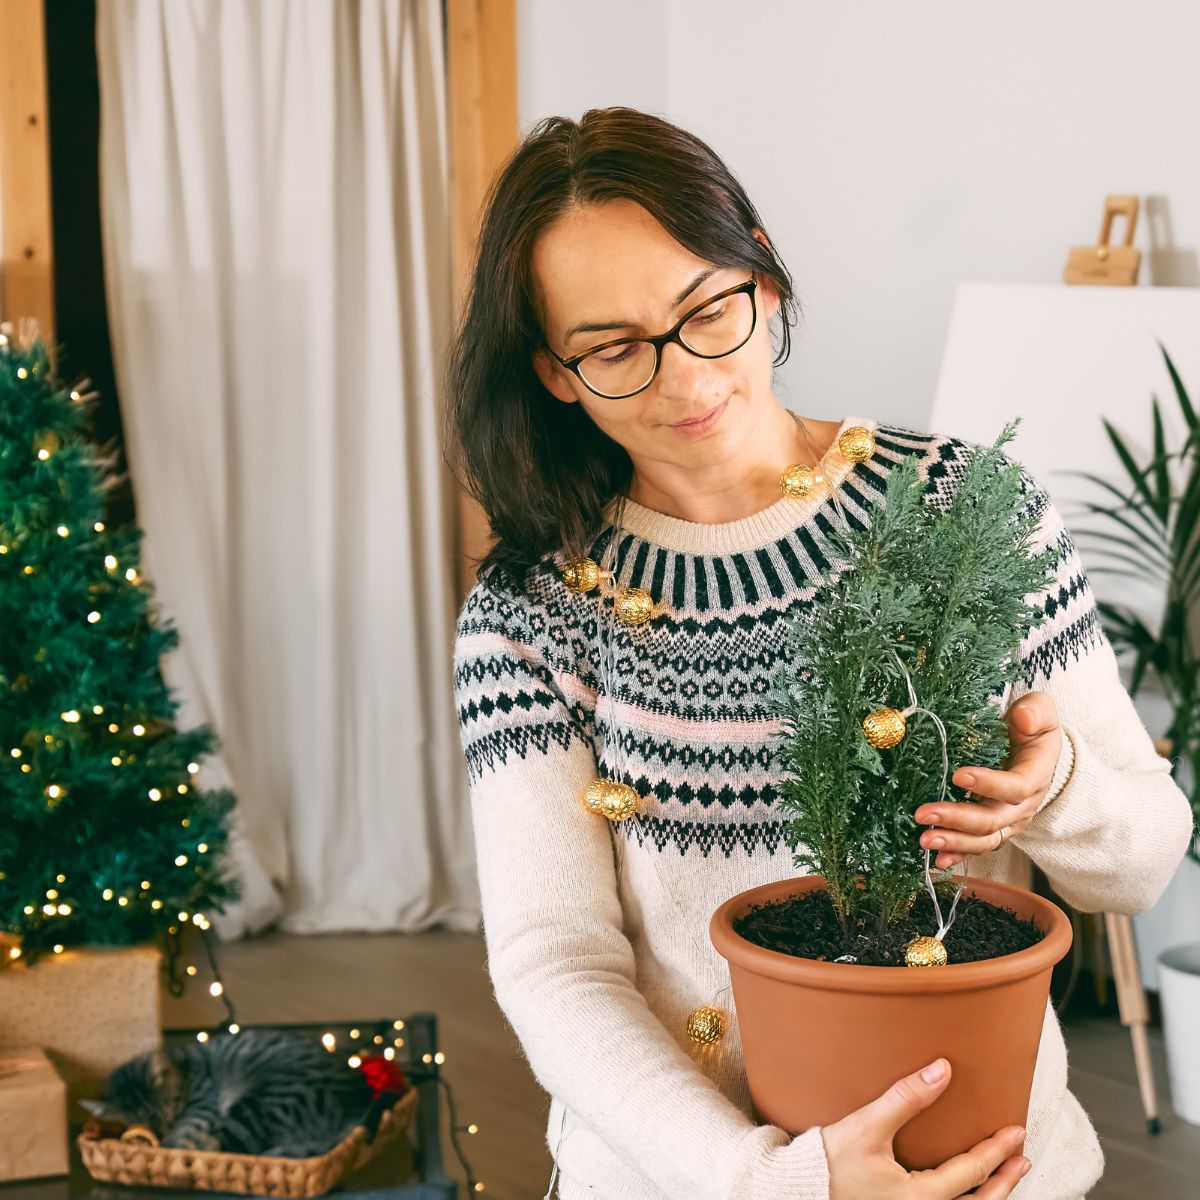 A woman decorating a potted christmas tree in her living room.